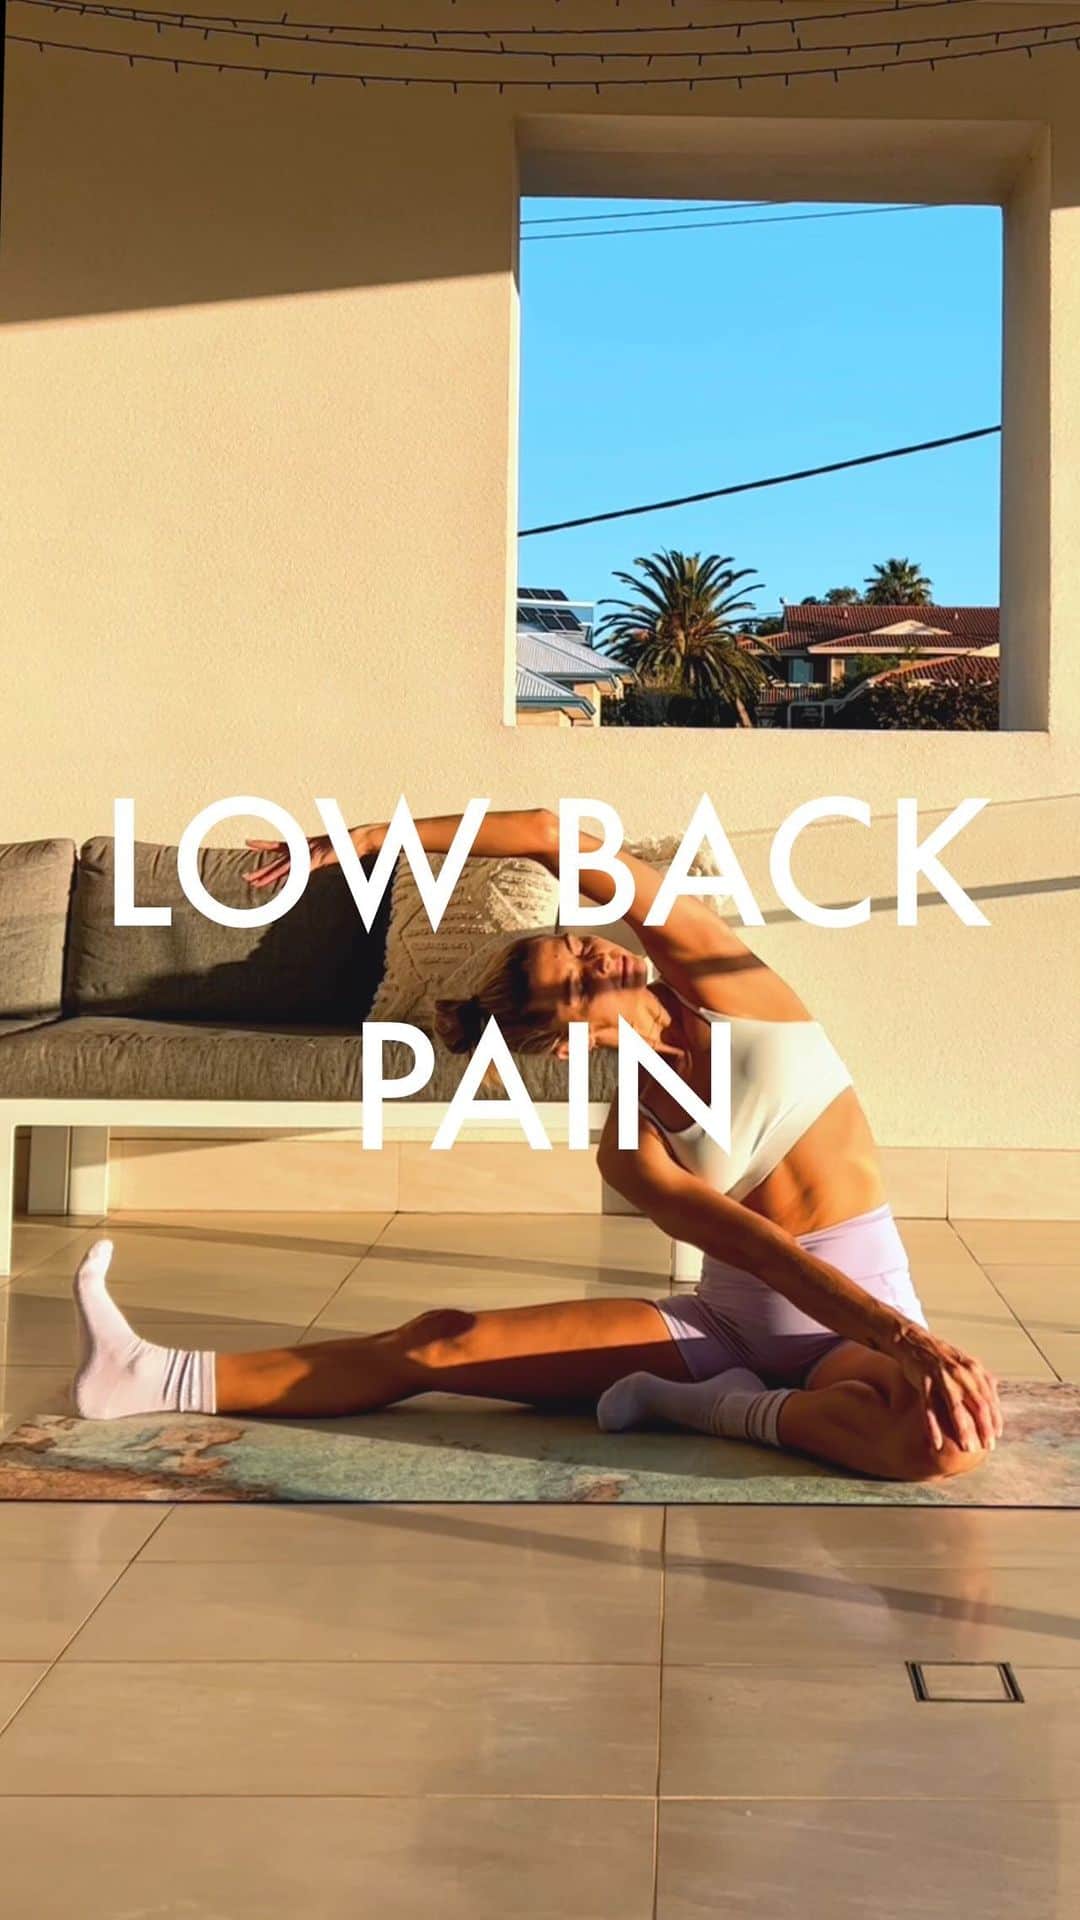 Amanda Biskのインスタグラム：「LOW BACK PAIN FLOW ✨ This afternoons sunset stretch…These are my go-to movements & stretches when my back is feeling stiff, restricted or painful. By the end of the week my body is DYING to do this 🤤  ▪️1. HIP HIKES - mobilises the sacroiliac joint at the back of the pelvis *if you have zero time, this is my NO.1 movement! So good! x40  ▪️2. FIGURE 4 - stretches the glutes (and hip flexor with the added knee push…think ‘push- pull’…push the knee away & pull foot closer’ x5 long breaths  ▪️3. SPINAL TWIST - stretches the glutes & QL (Quadratus Lumborum - muscle running up & down the lower spine) x5 long breaths  ▪️4. HIP FLEXOR - stretches the hip flexor at the front of the hip. Keep your belly button pulled in. Placing your hand on your lower back & pressing your spine into your hand helps! x5 long breaths  ▪️5. LIZARD LUNGE - Stretches the hip flexor & groin. Drop your hips & pull your chest forward x5 long breaths  ▪️6. PIGEON - Start with the arm bends, pulling your belly button down each time you bend x5 bends - Hold the stretch next either on elbows, arms stretched forward or in the twist x5 long breaths  ▪️7. SIDE STRETCH - Stretches the QL. Pull on the knee as you rotate your chest up (look up!) x5 long breaths  * Do the flow on one side…then the other ☺️ #lowbackpain #backpain #backstretches  ab♥️x  Wearing: @lskd 💜 AMANDA15 for 15% off! 💸」